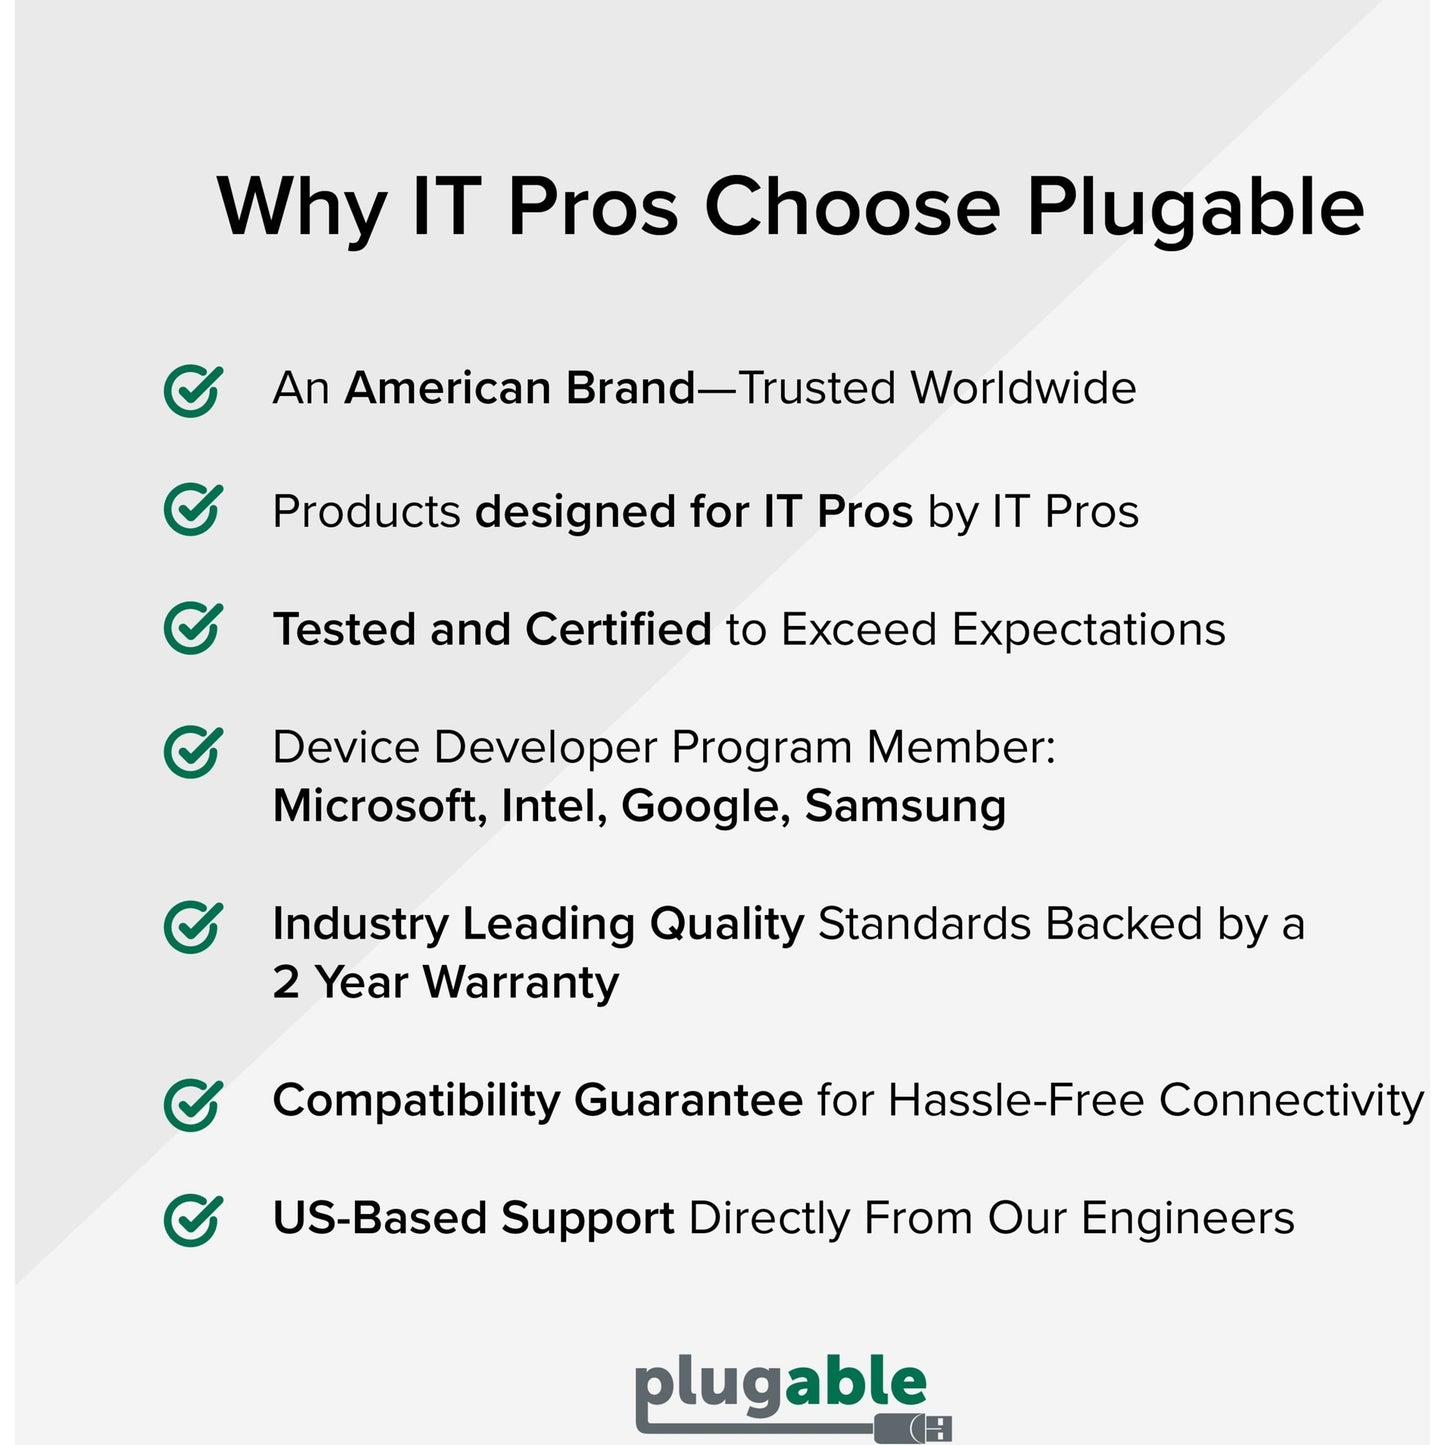 Plugable USB C to M.2 NVMe Tool-free Enclosure USB C and Thunderbolt 3 Compatible up to USB 3.1 Gen 2 Speeds (10Gbps).